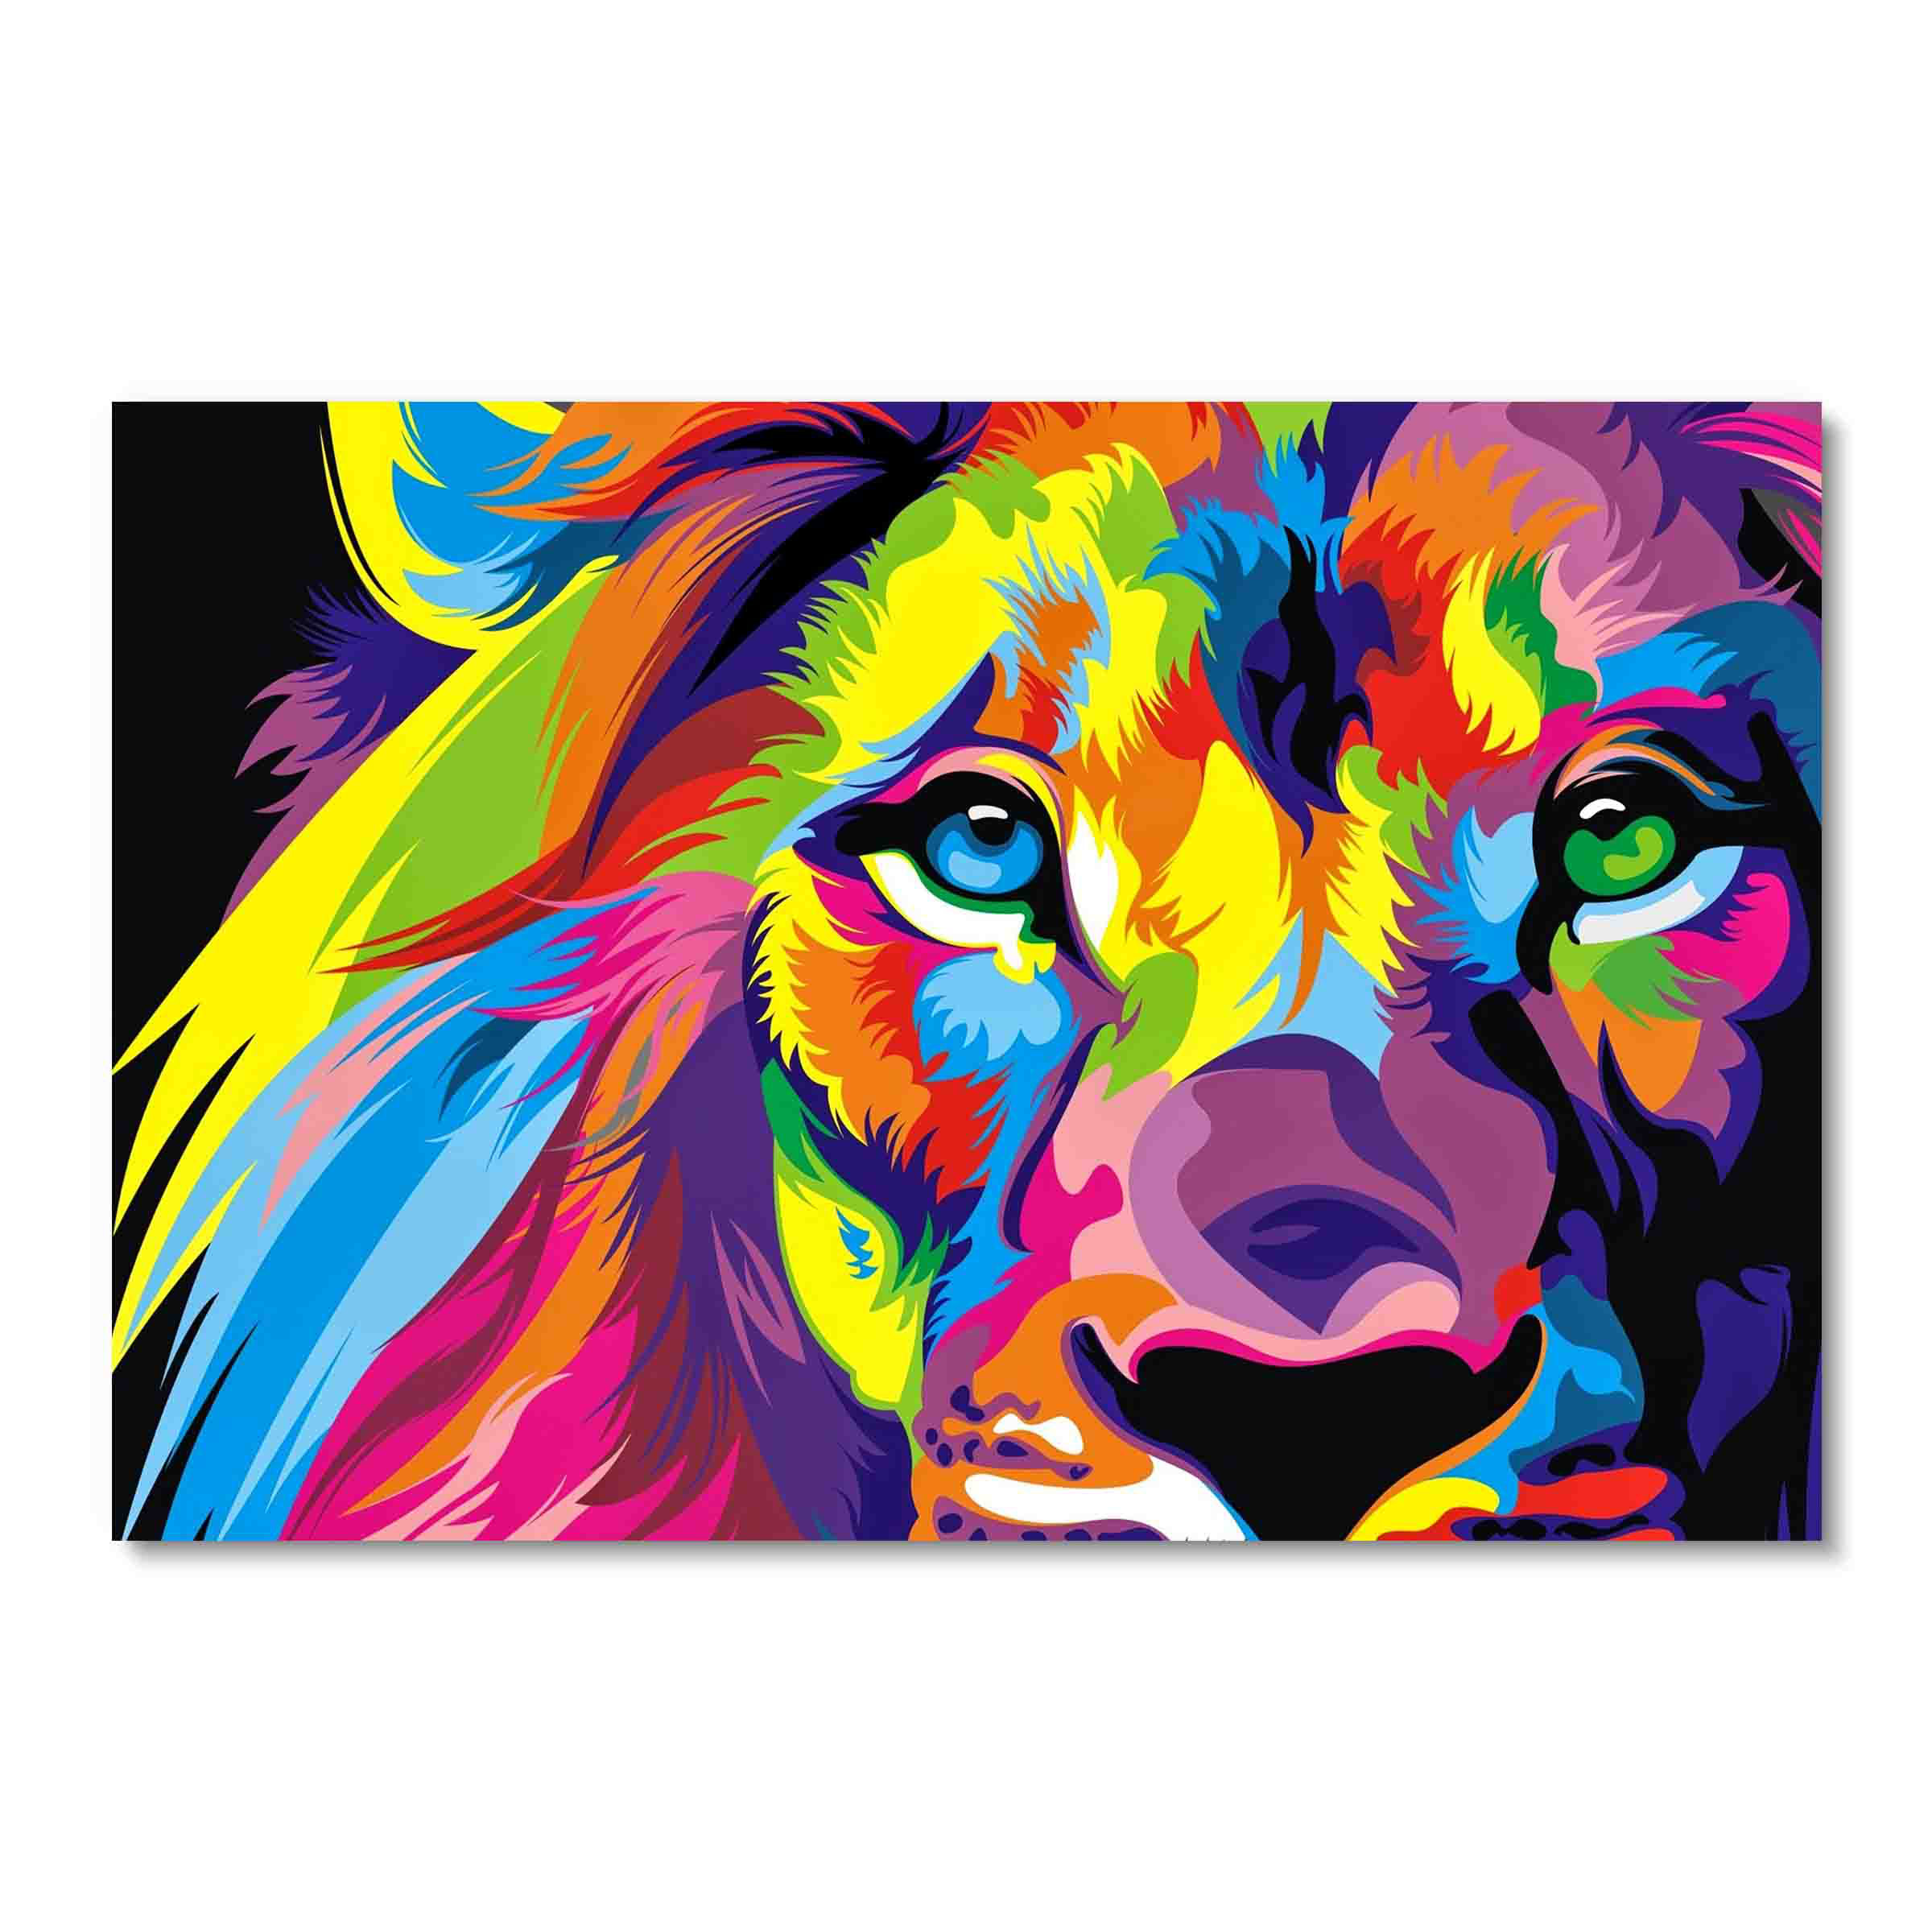 Abstract Art Canvas Poster Colorful Animal Picture Print Wall Home Decor  Dog Cat | eBay